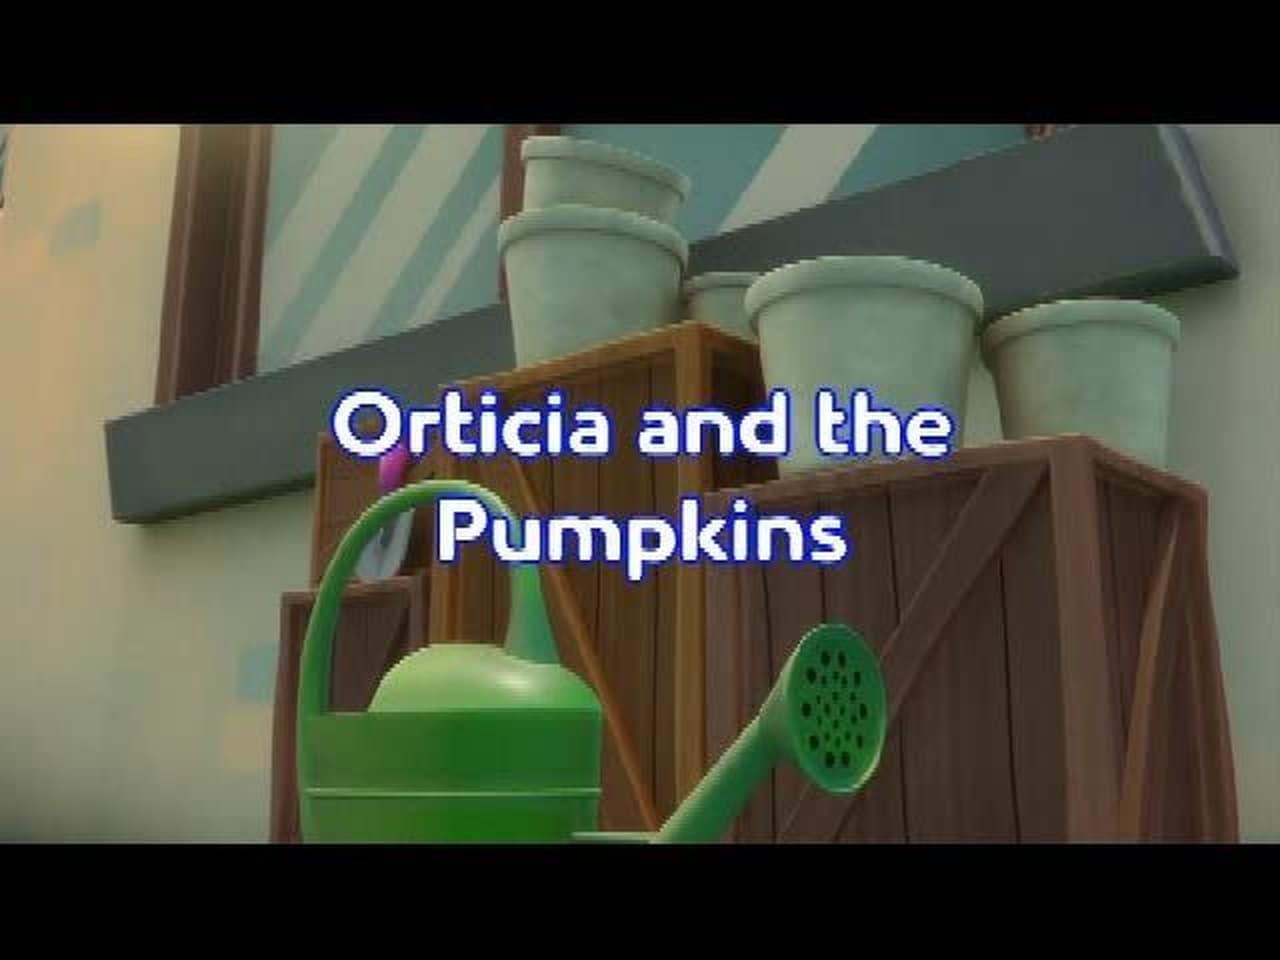 Orticia and the Pumpkins